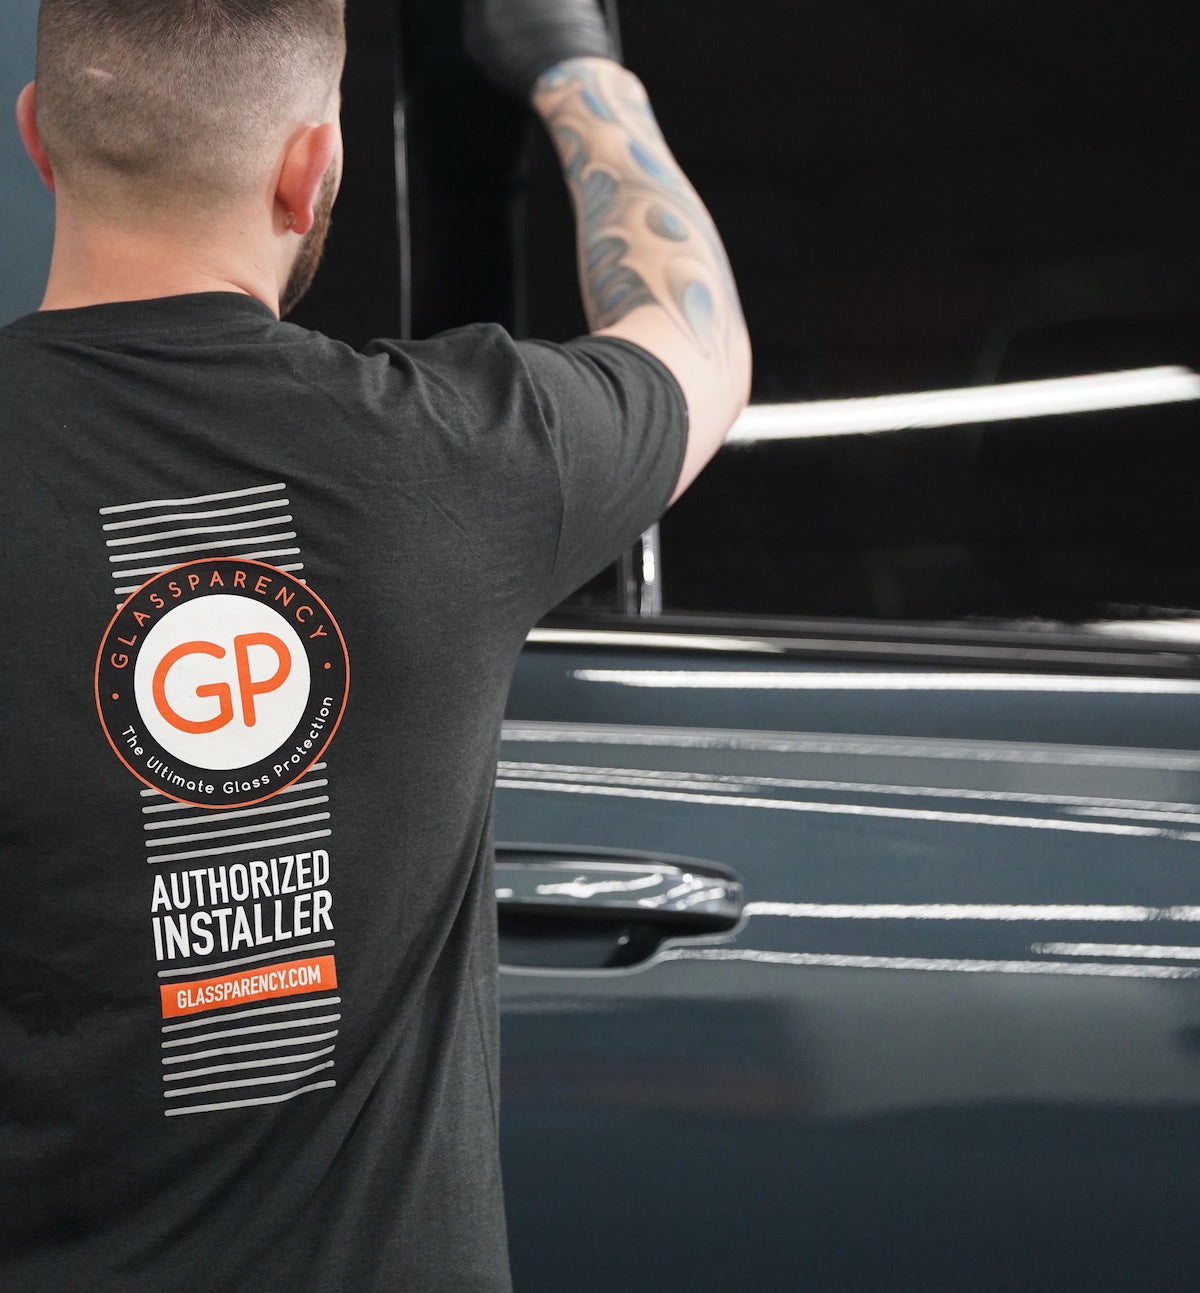 glassparency authorized installer wearing authorized installer t-shirt applying windshield treatment